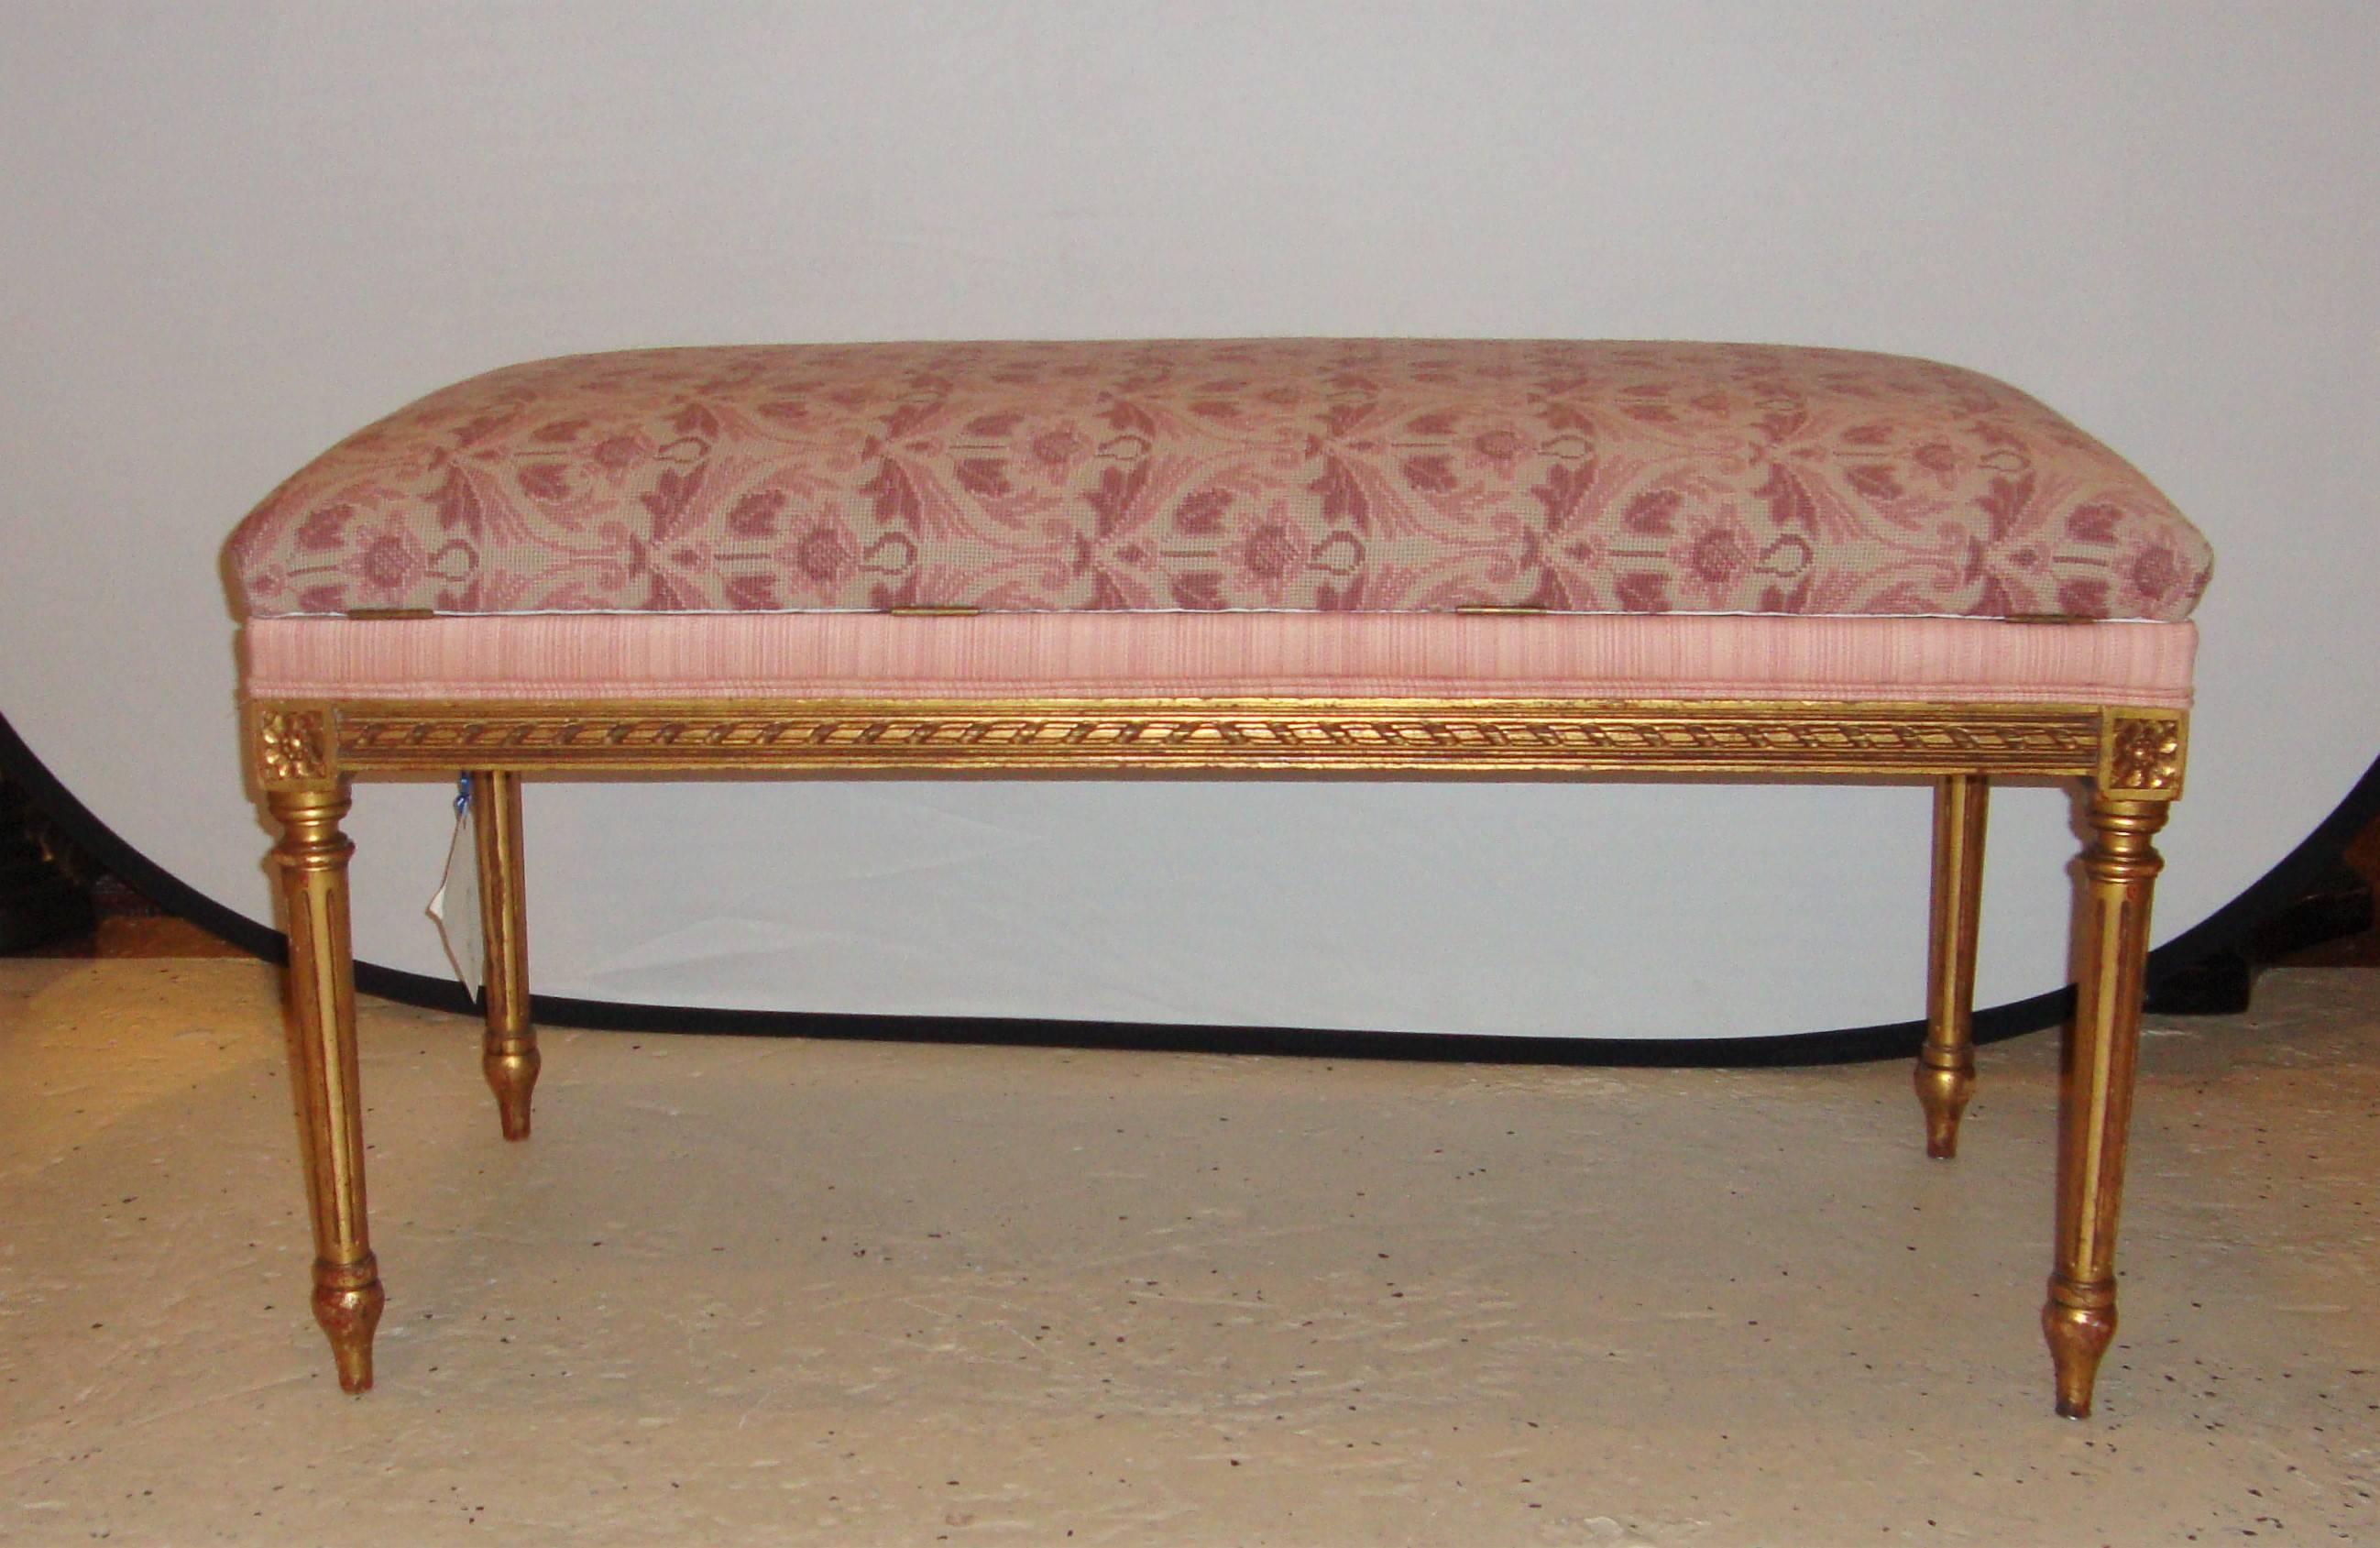 Gilt piano bench with fluted legs and carved florets. Cushion with pink, rose patterned tapestry fabric.